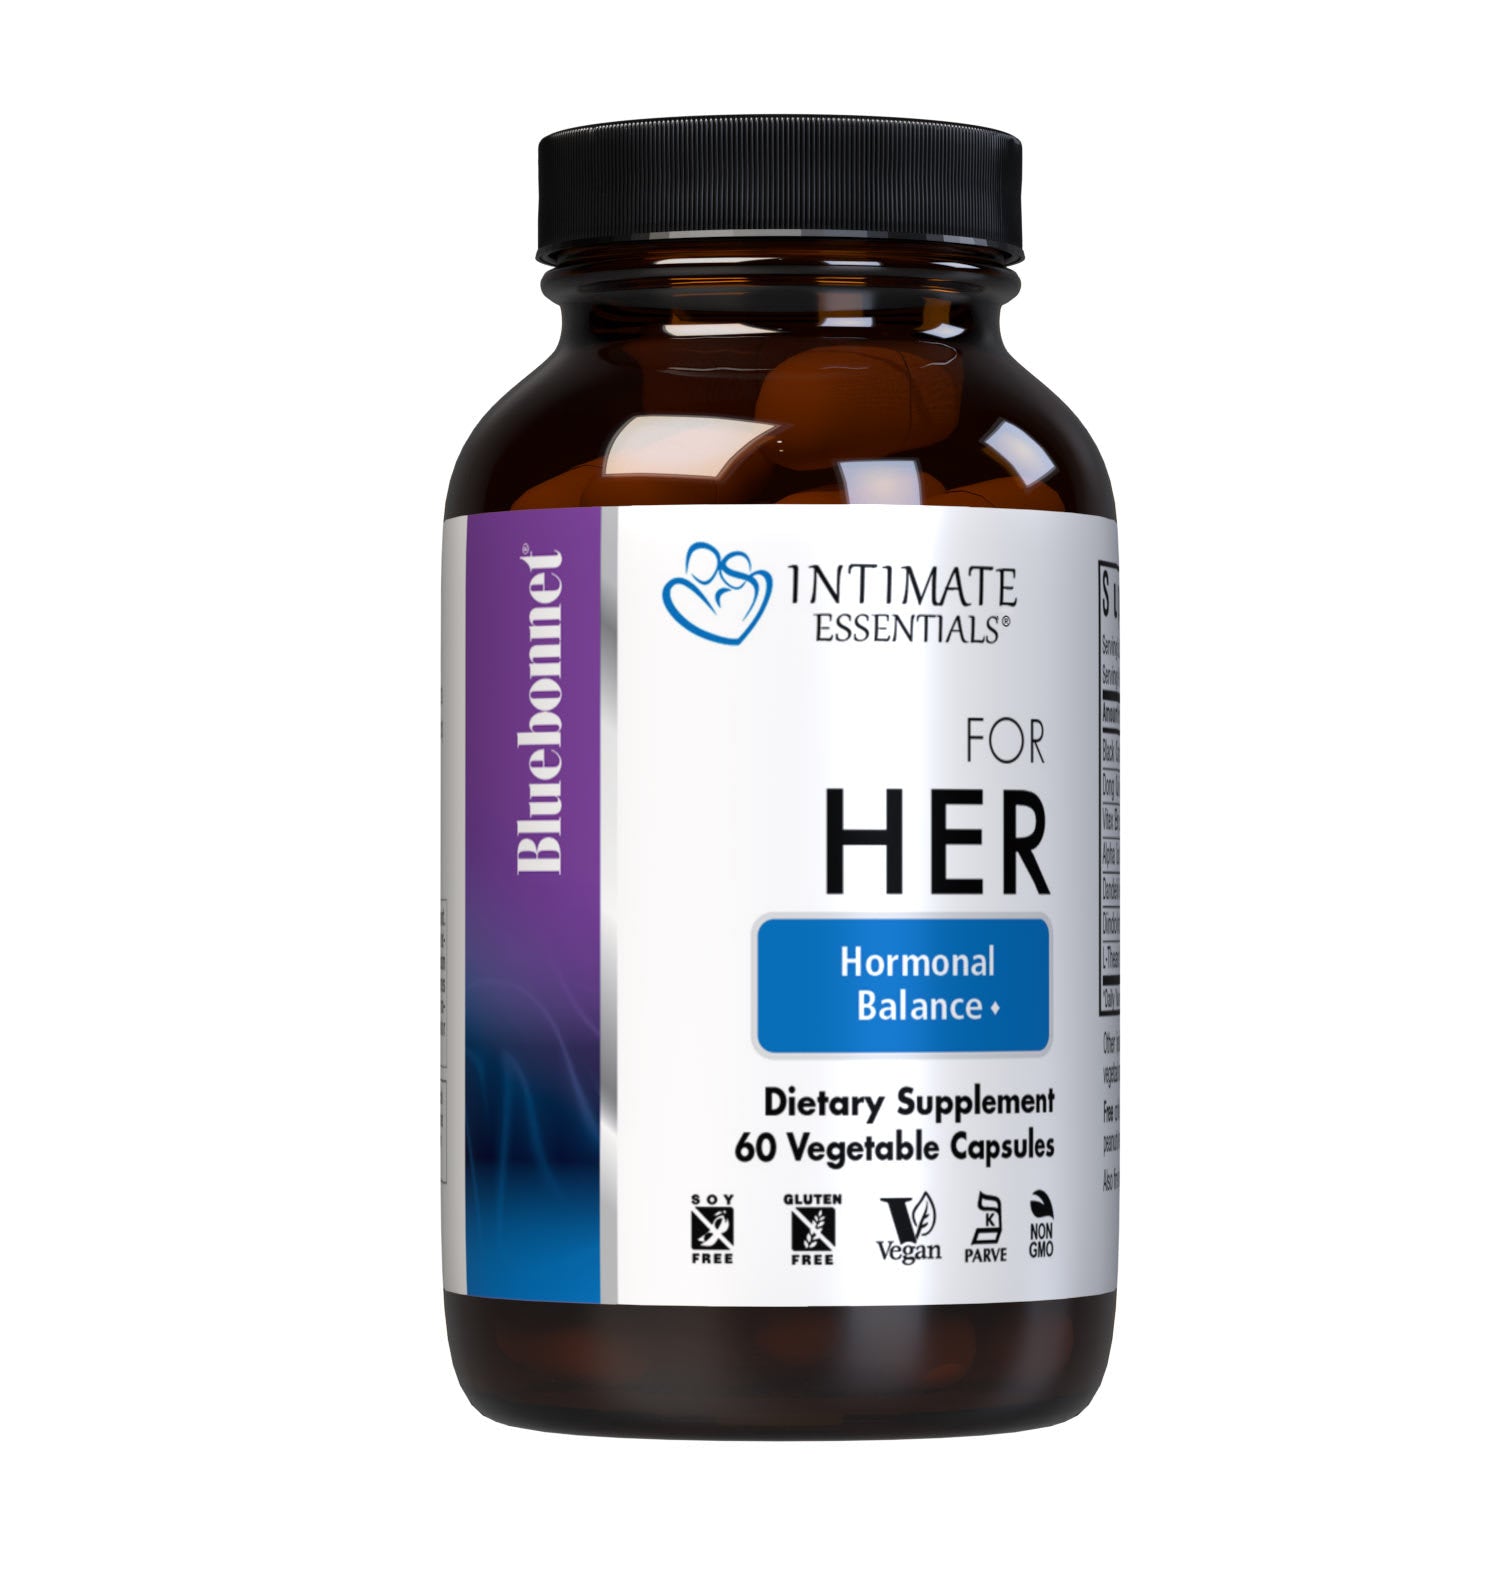 Bluebonnet’s Intimate Essentials® For Her Hormonal Balance Capsules are specially formulated to help boost a woman’s sexual energy and youthful vibrance by balancing hormones during PMS and menopause. Available in easy-to-swallow vegetable capsules for maximum assimilation and absorption. #size_60 count